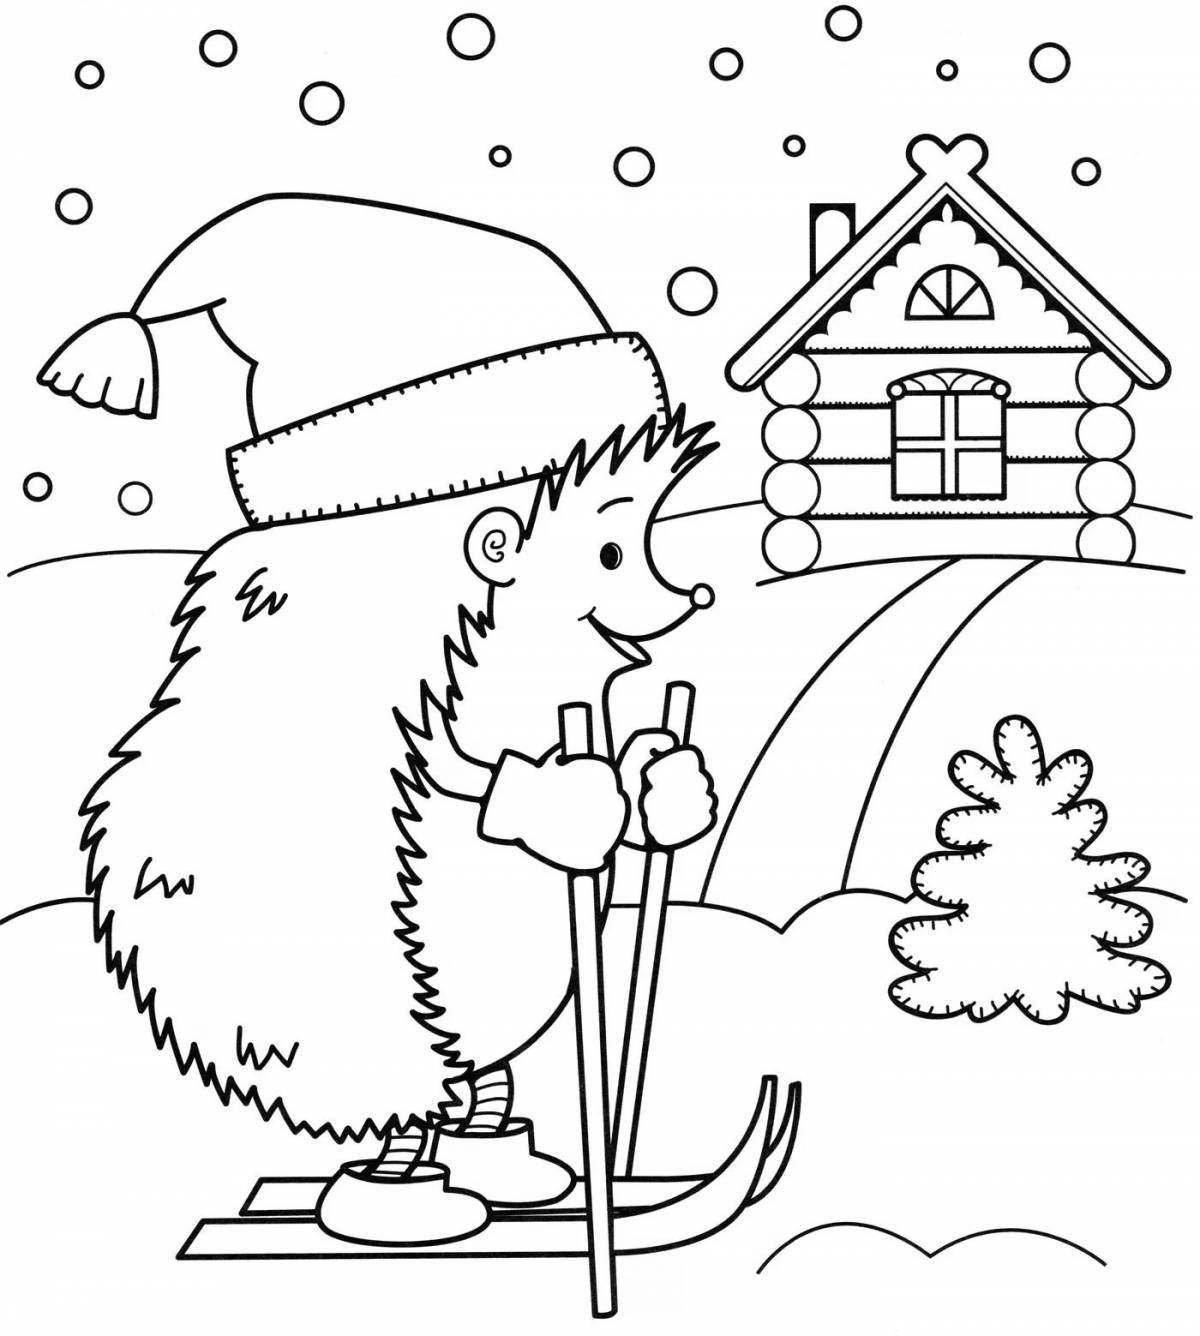 Playful coloring hedgehog new year